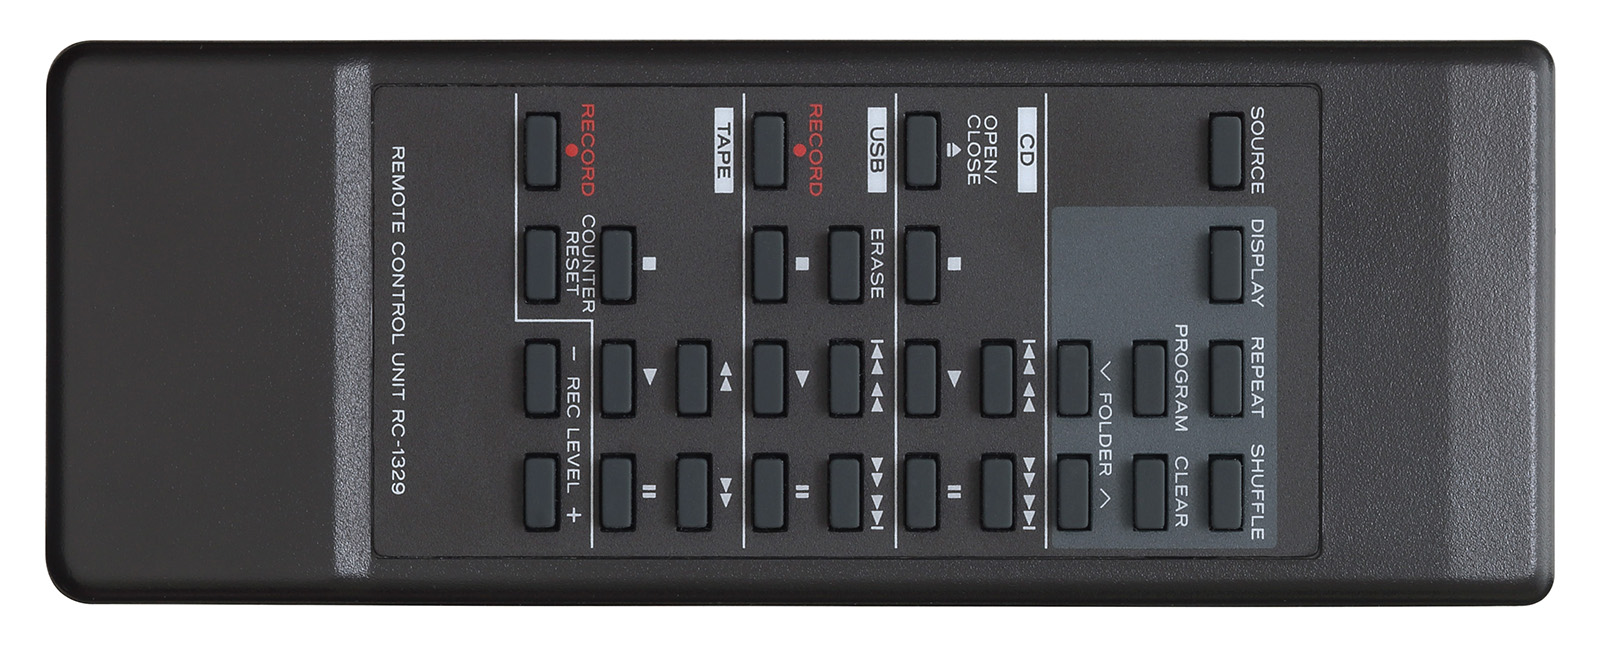 CD-A580 | FEATURES | TASCAM - United States